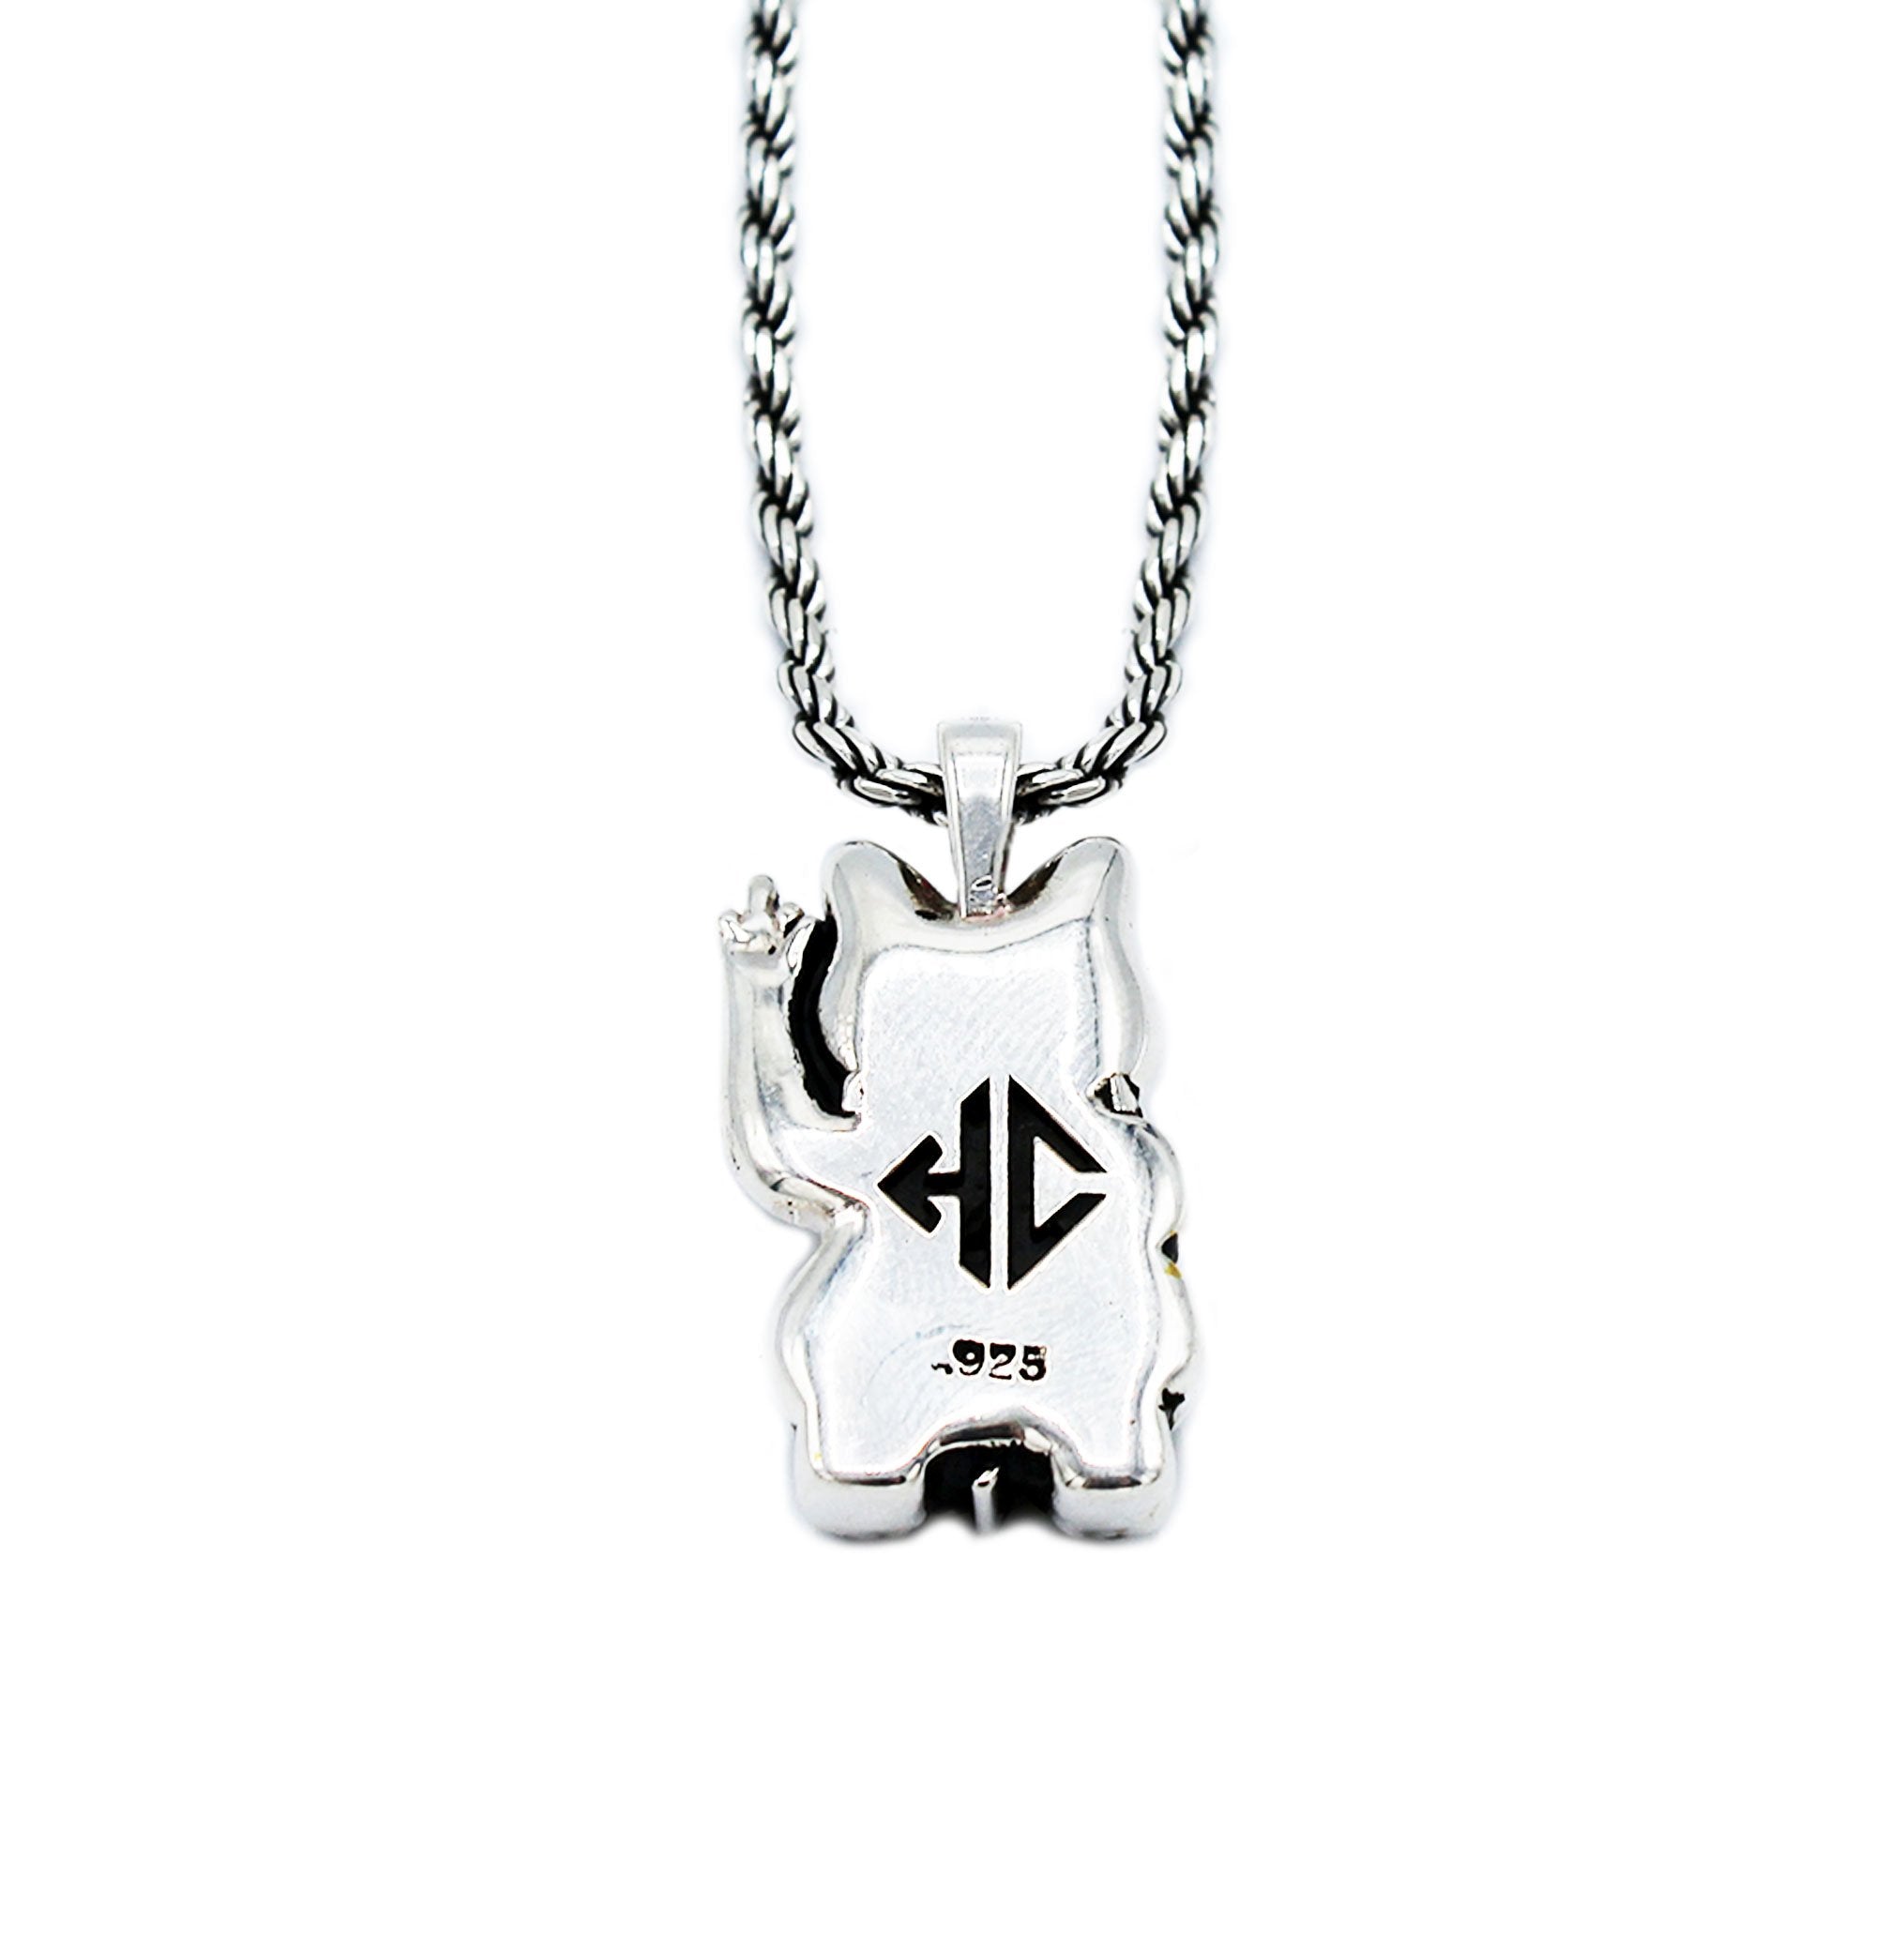 .925 sterling silver lucky cat necklace with Han Cholo logo